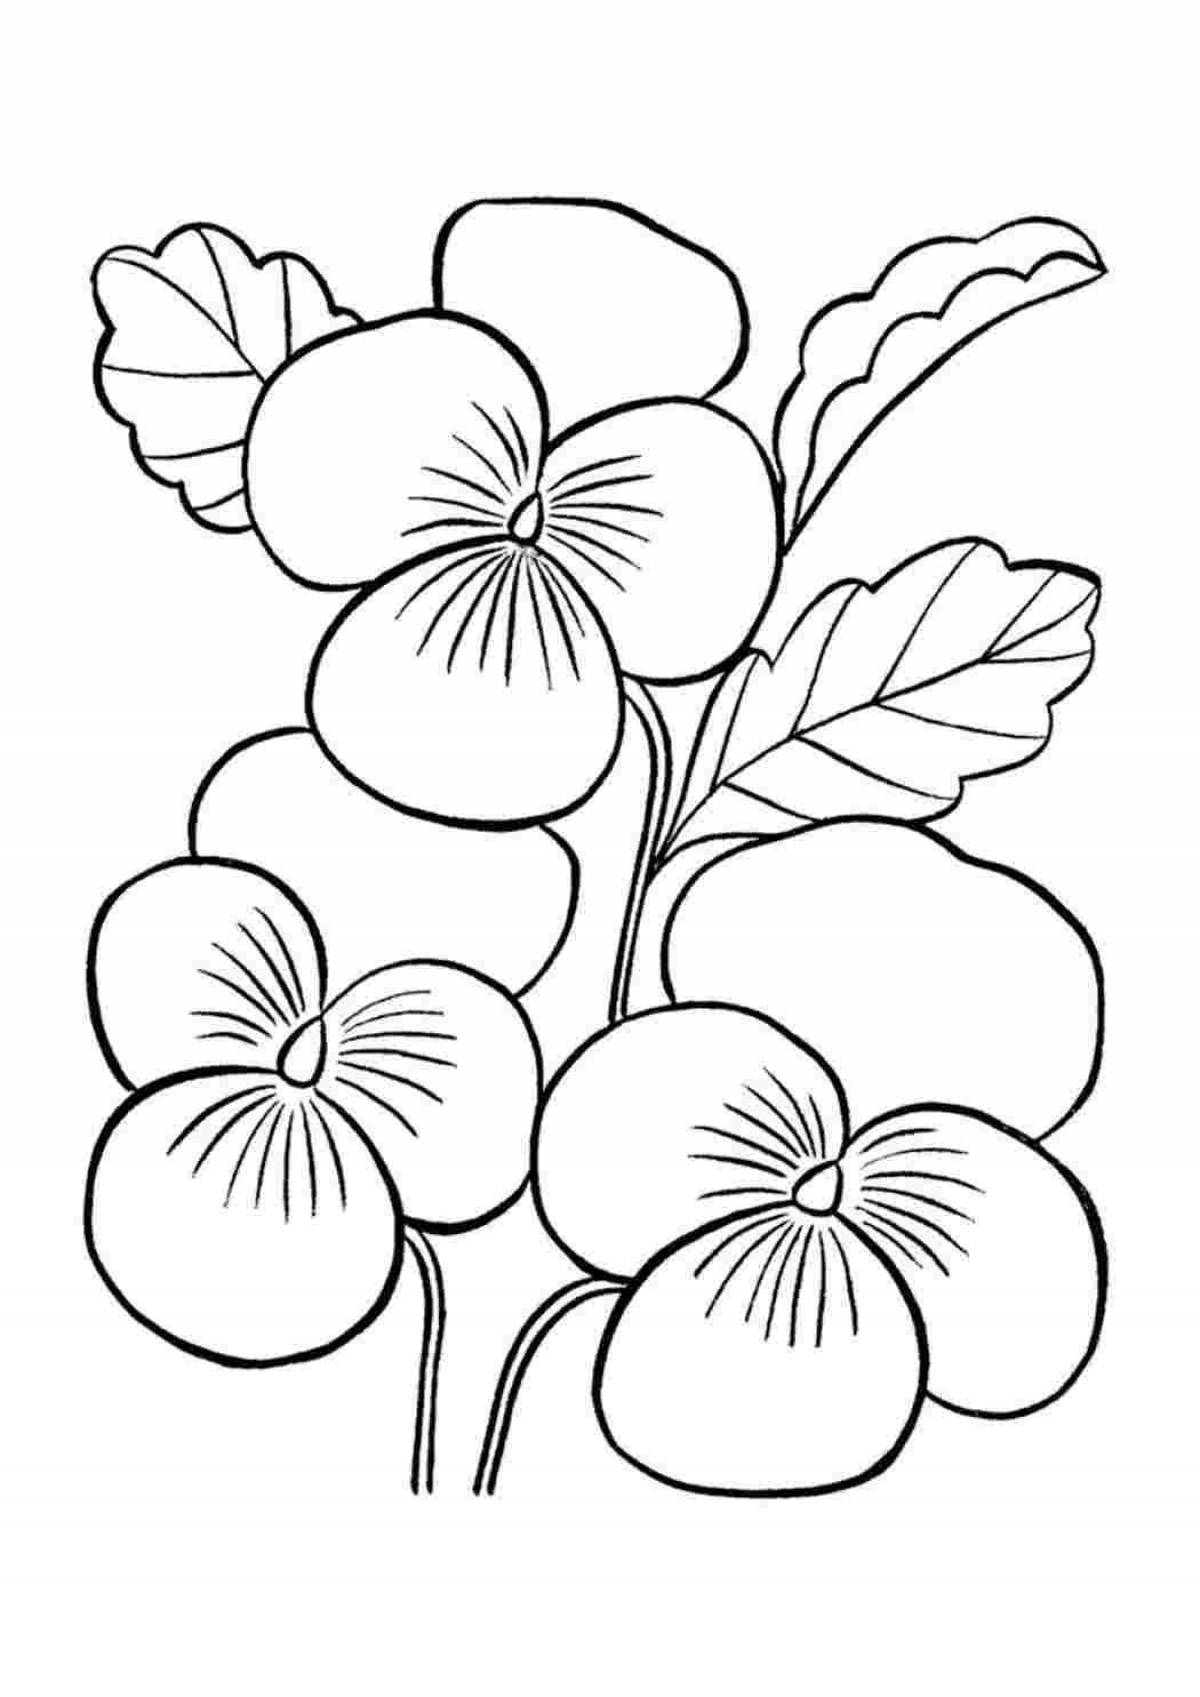 Bright purple houseplants coloring page